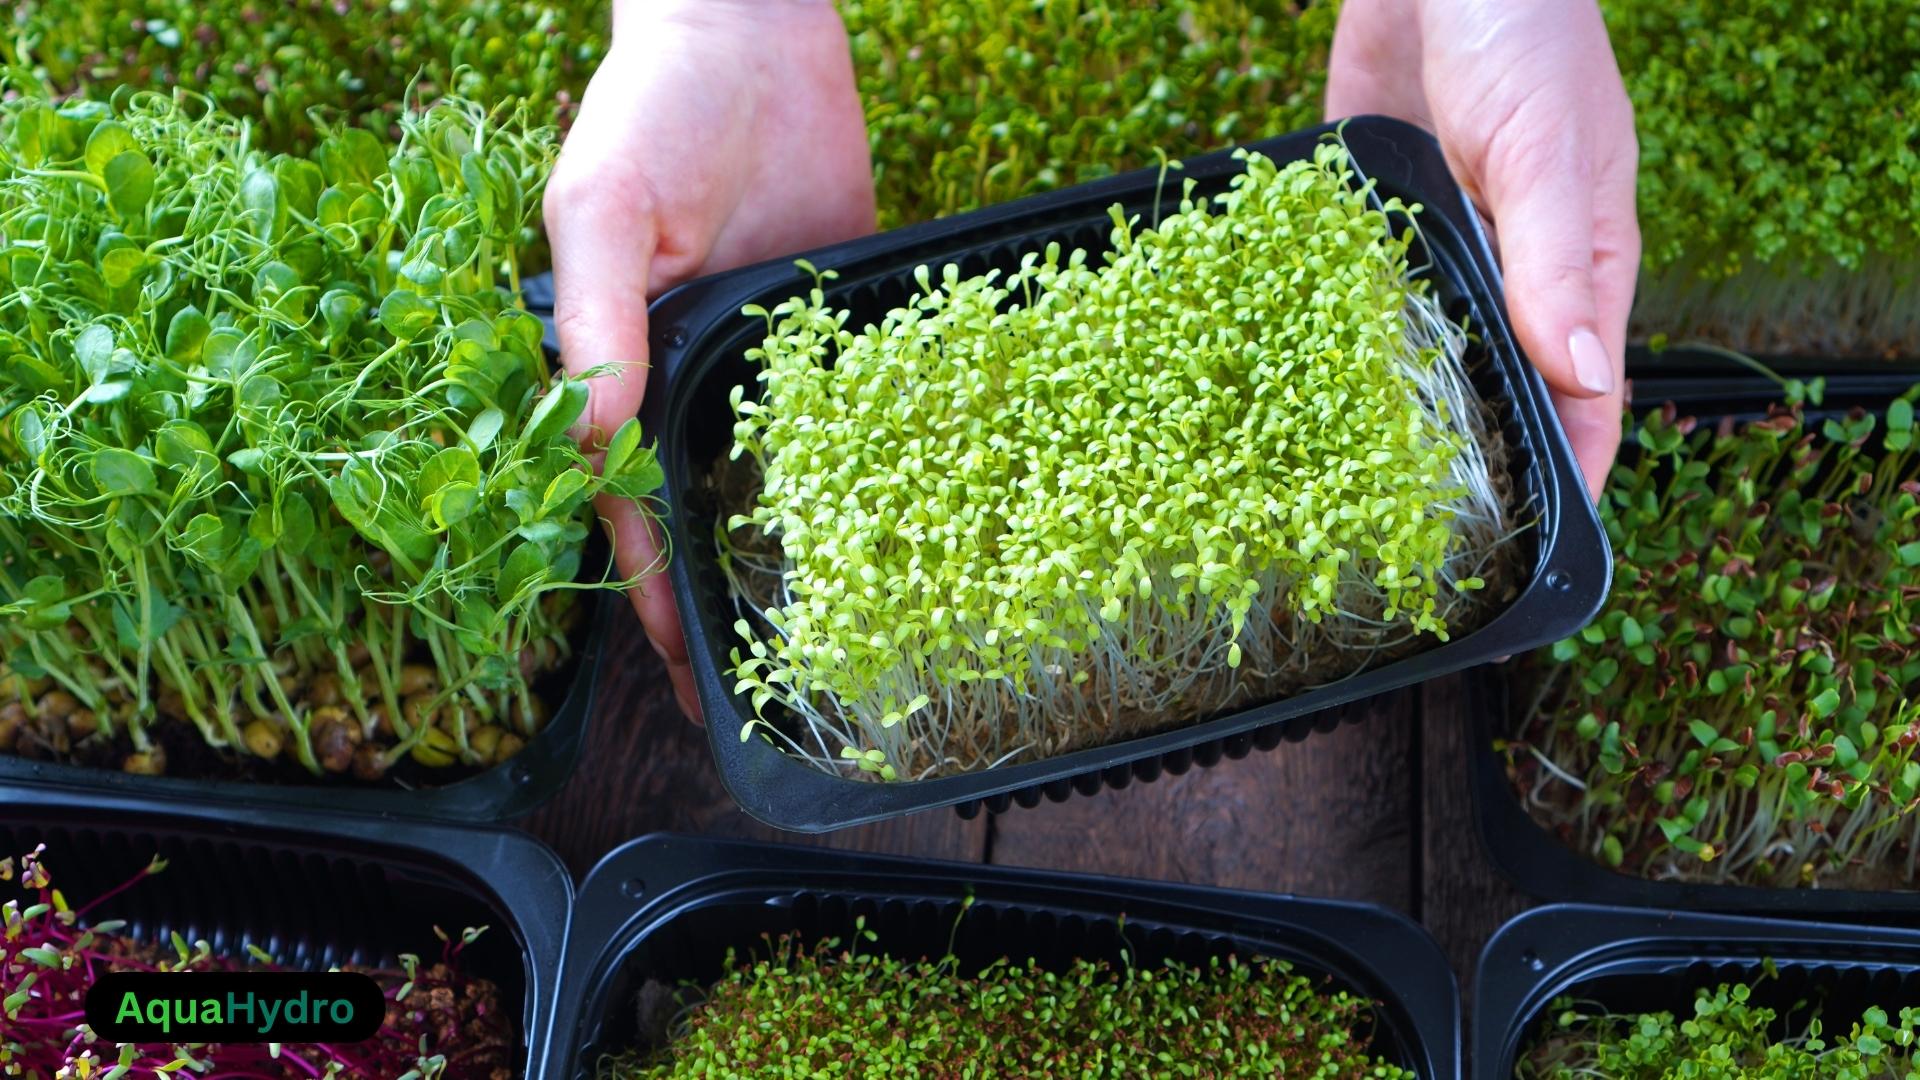 Aquaponic microgreens system with lush green plants ,exemplifying sustainable farming